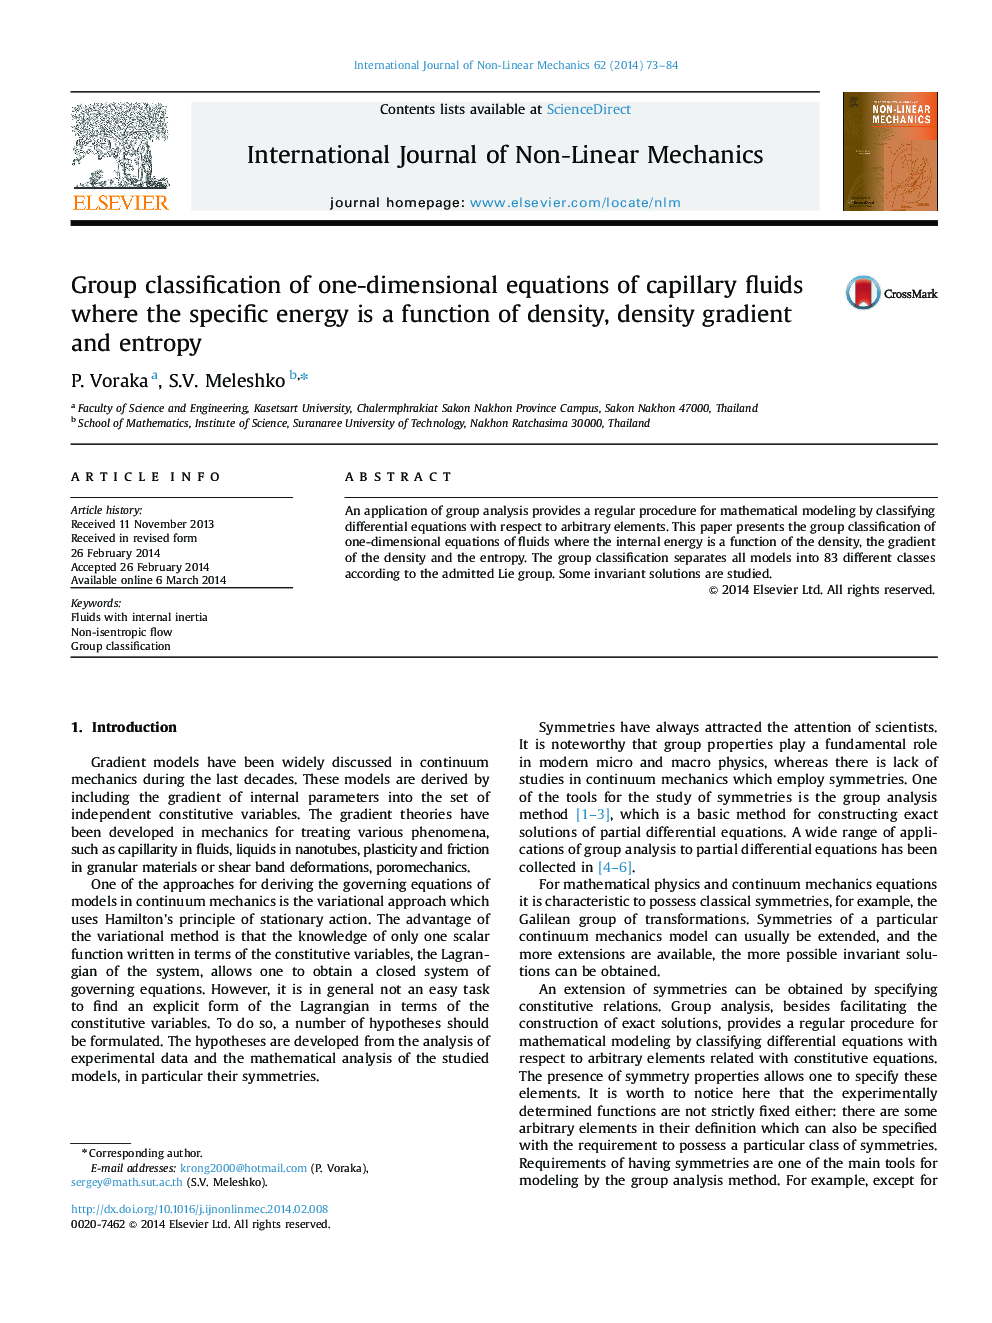 Group classification of one-dimensional equations of capillary fluids where the specific energy is a function of density, density gradient and entropy